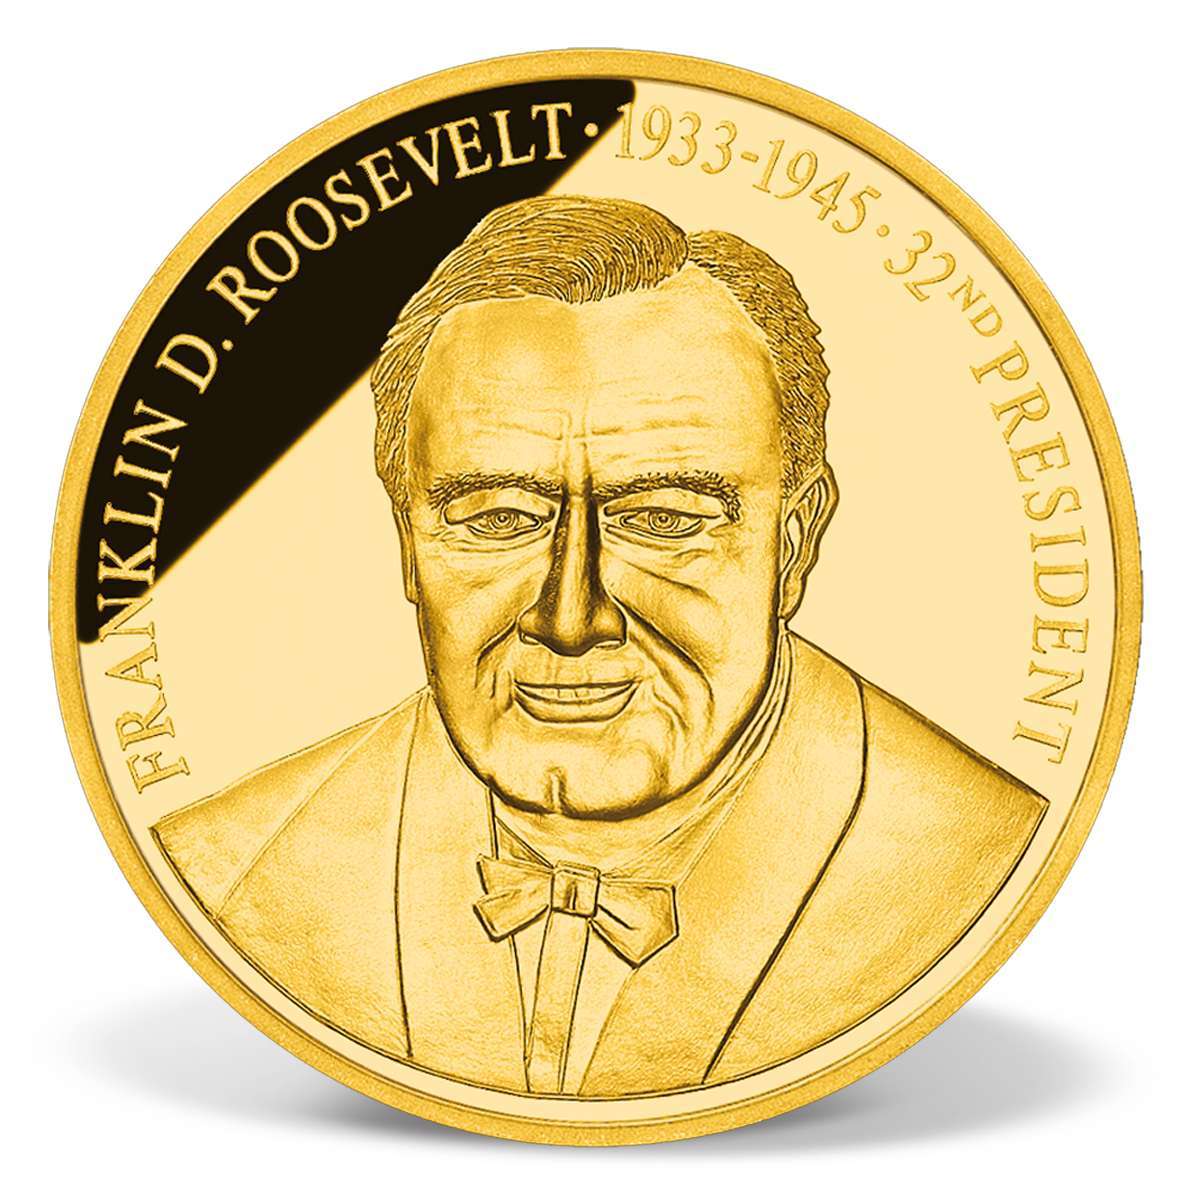 Franklin D. Roosevelt Commemorative Coin | Gold-Layered | Gold ...